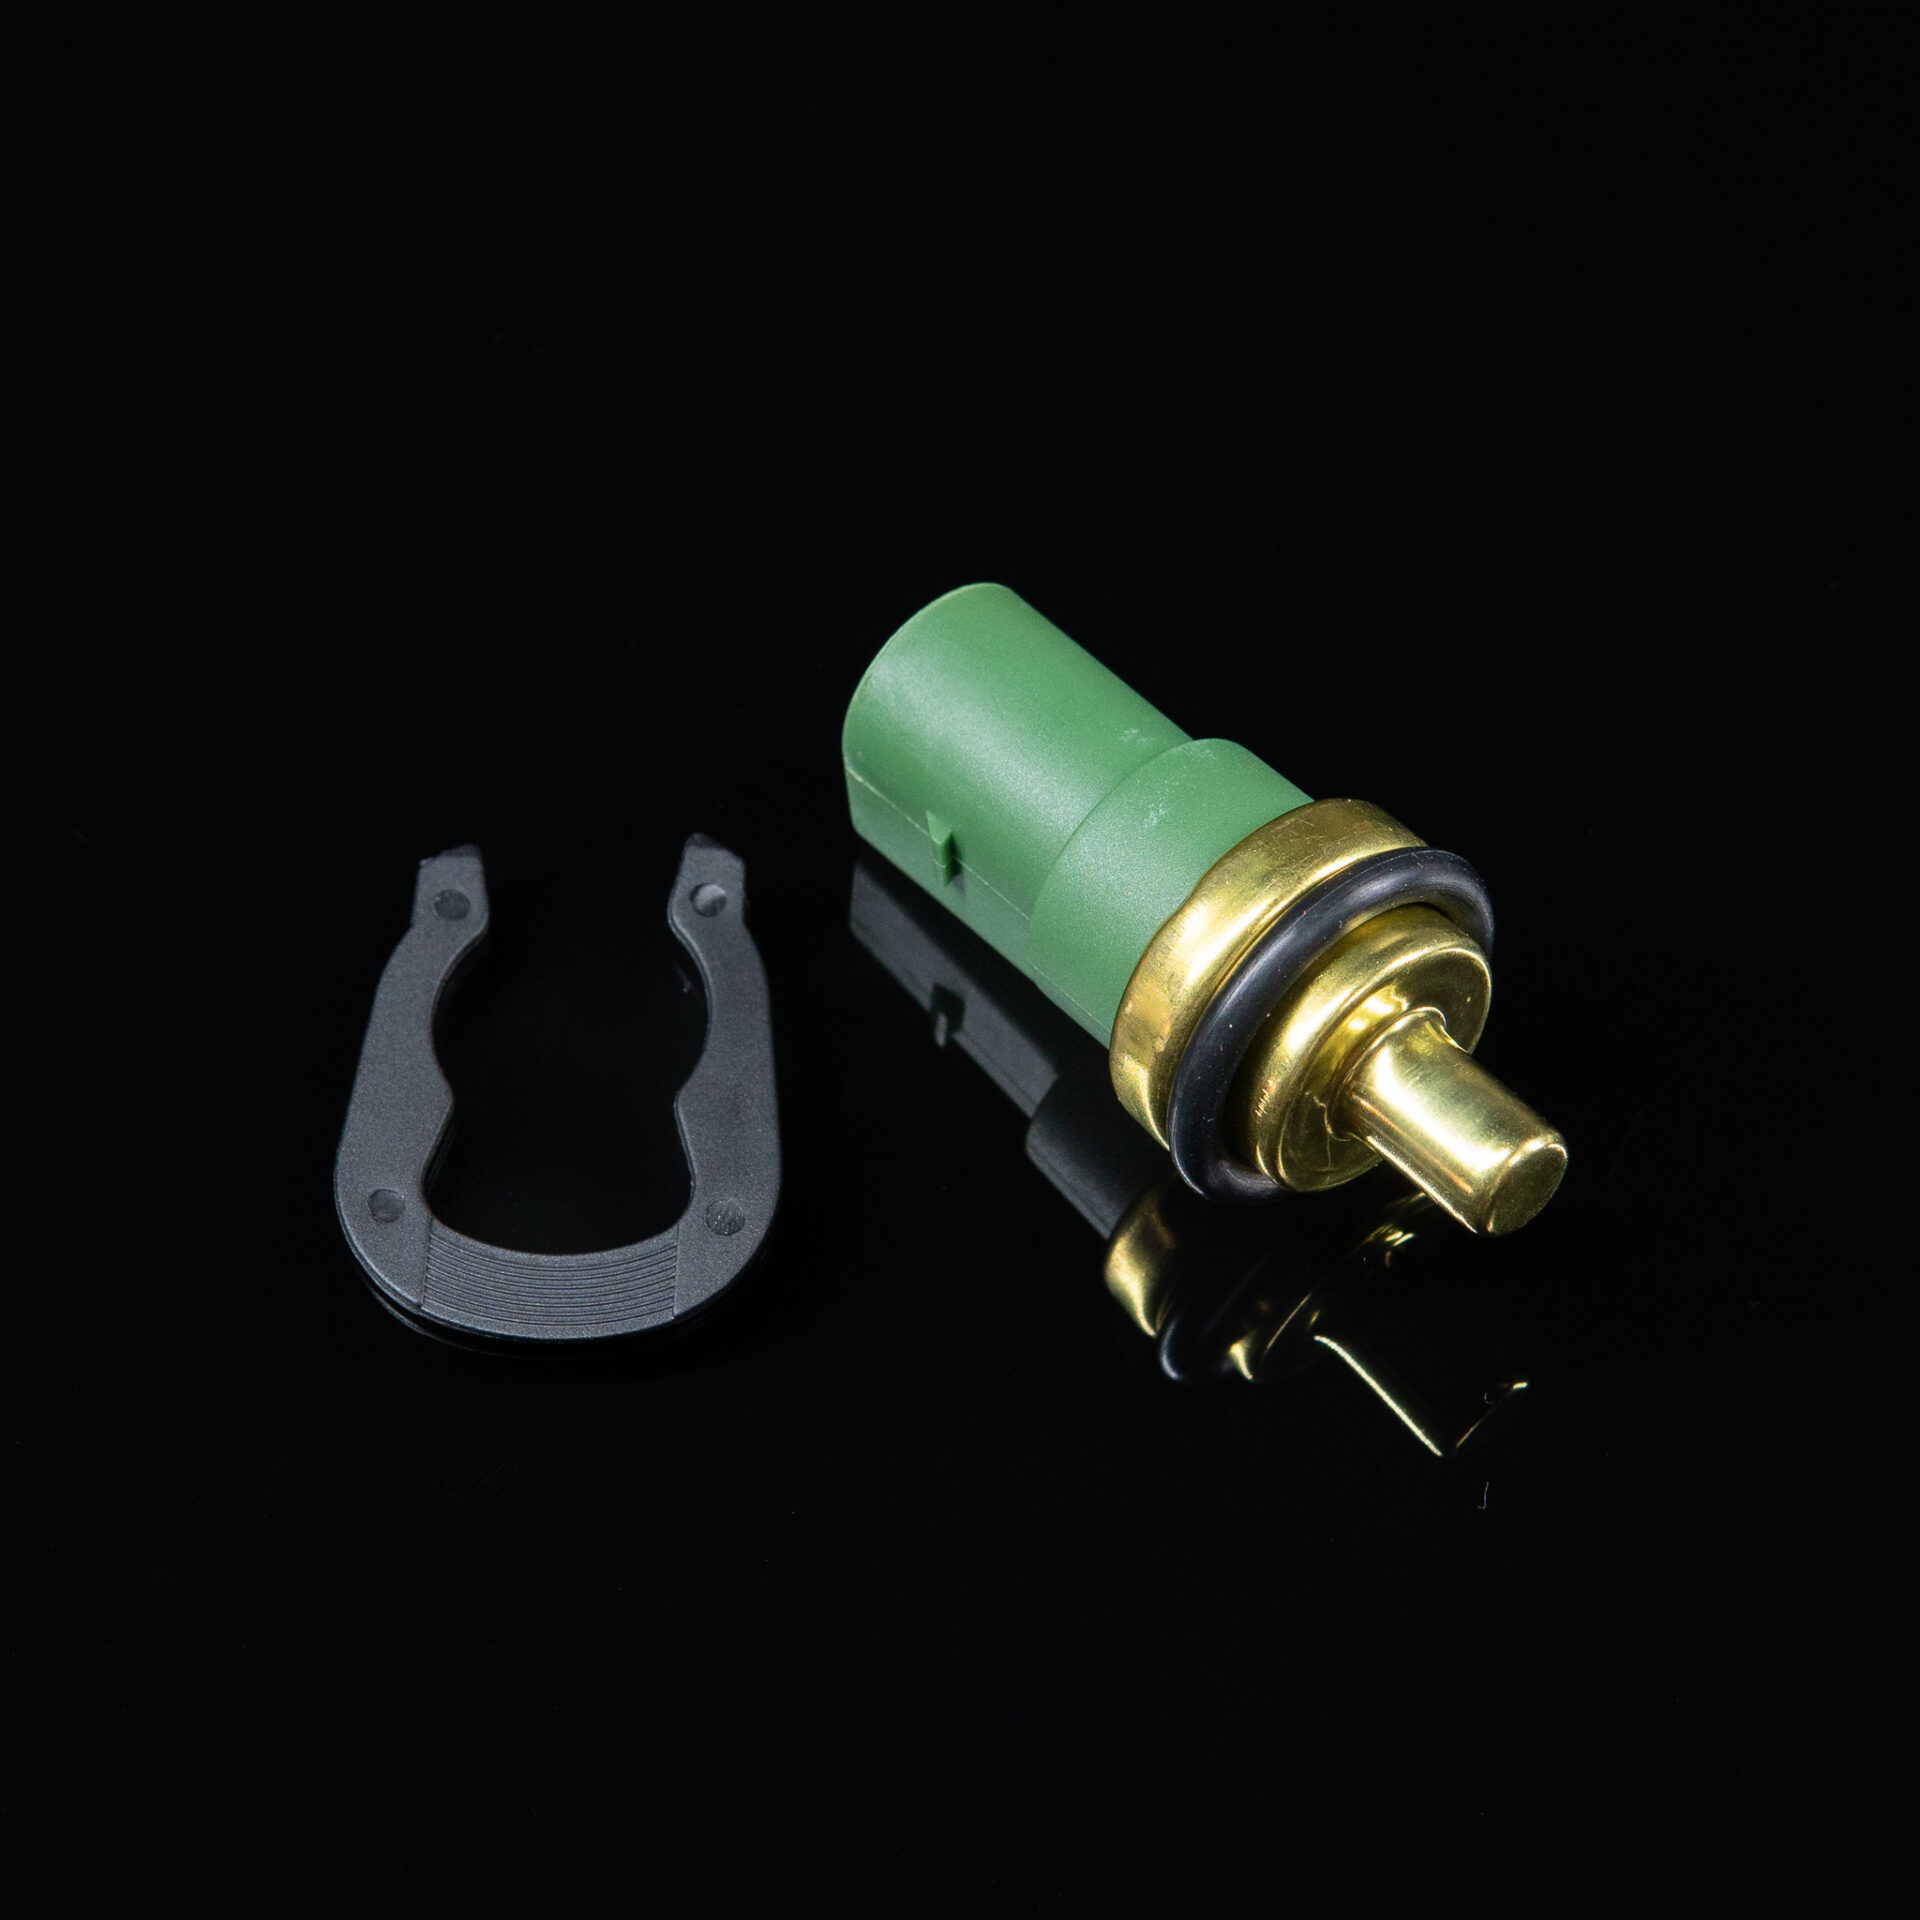 https://www.the-tuner.com/wp-content/uploads/2022/07/Kuehlmitteltemperatursensor-mit-O-Ring-und-Verriegelung-Coolant-Temperature-Sensor-with-O-Ring-and-Latch-THE-B5-067-00-Bild-6.jpg